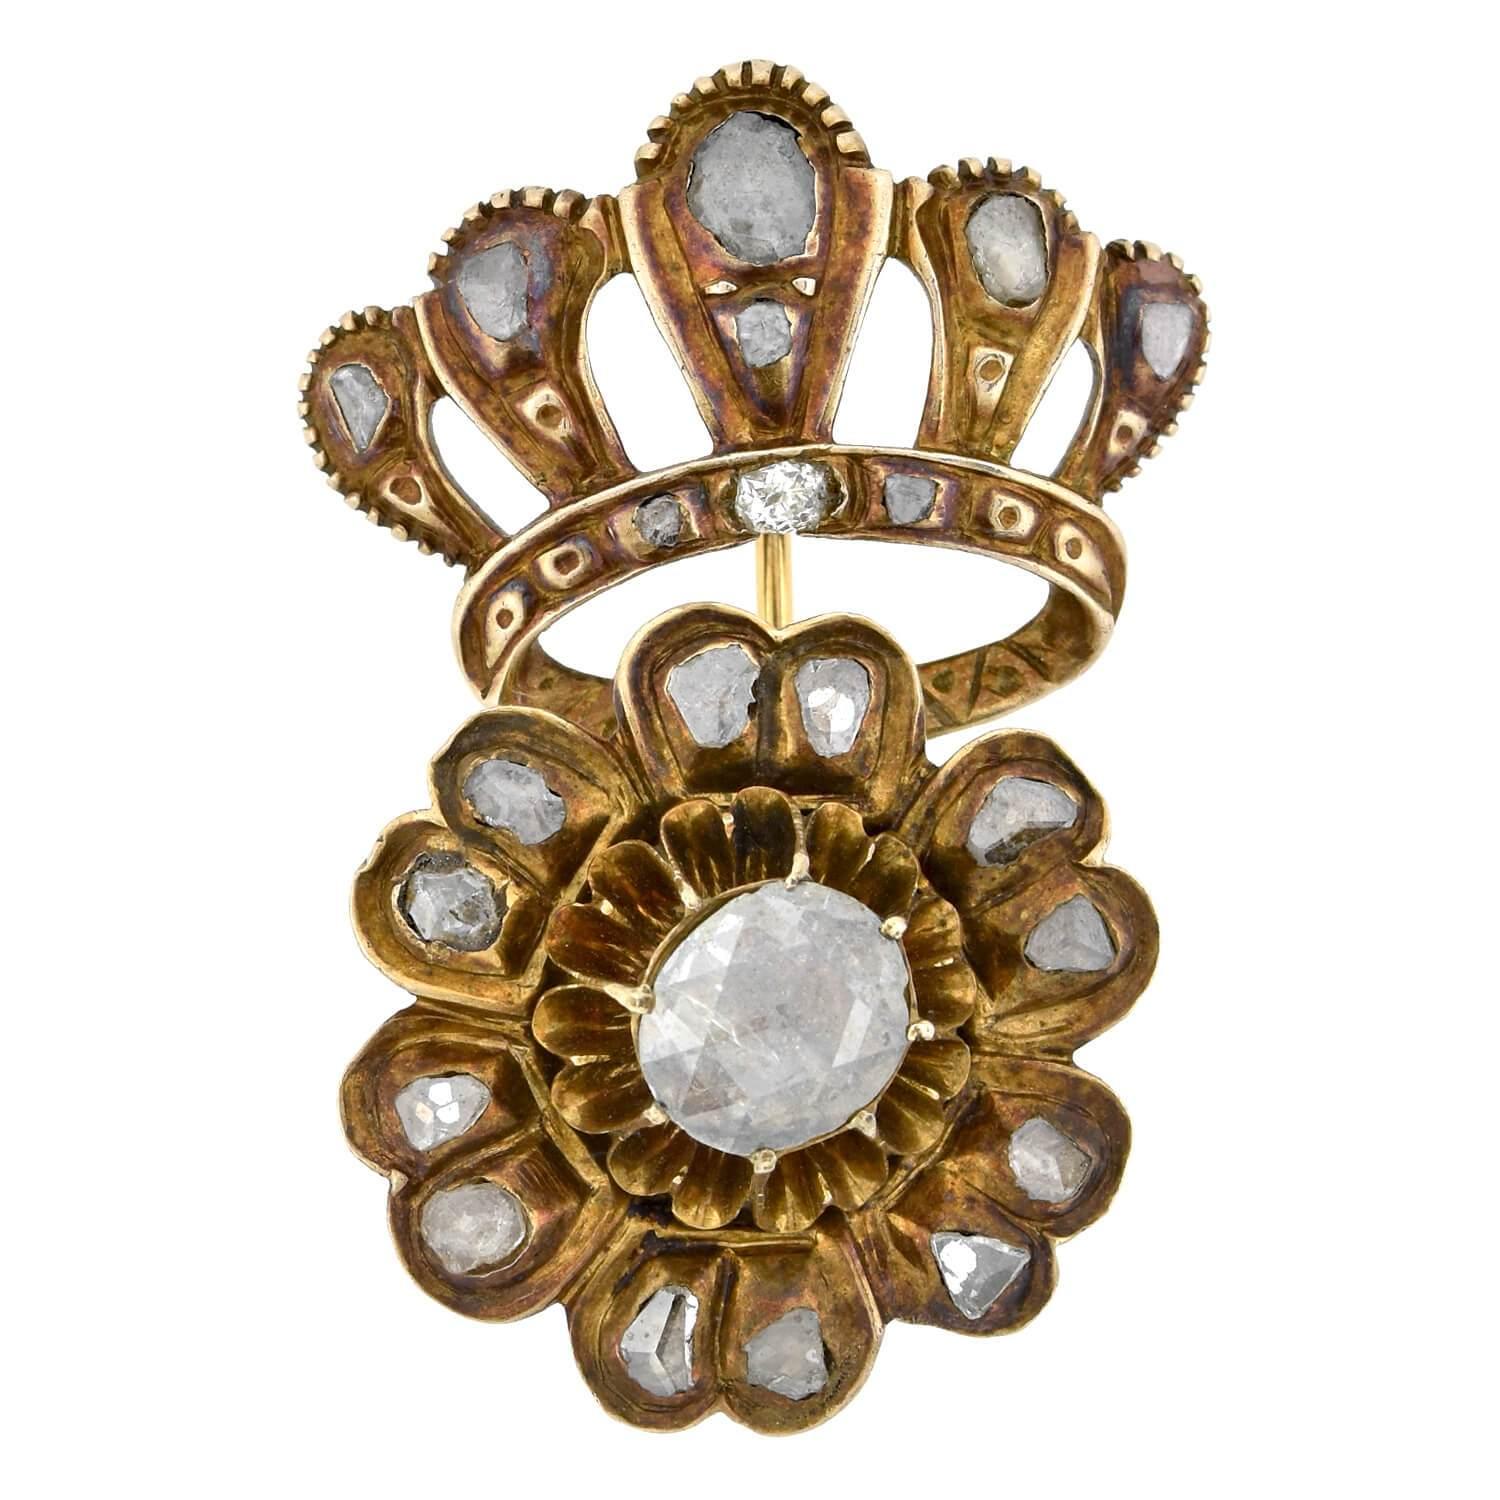 A breathtaking and highly unique tremblé pin from the Early Victorian (ca1850s) era! This magnificent piece is crafted in rosy 12kt yellow gold and features a bold crown and a floral motif. A handcrafted open wirework crown is attached at the base